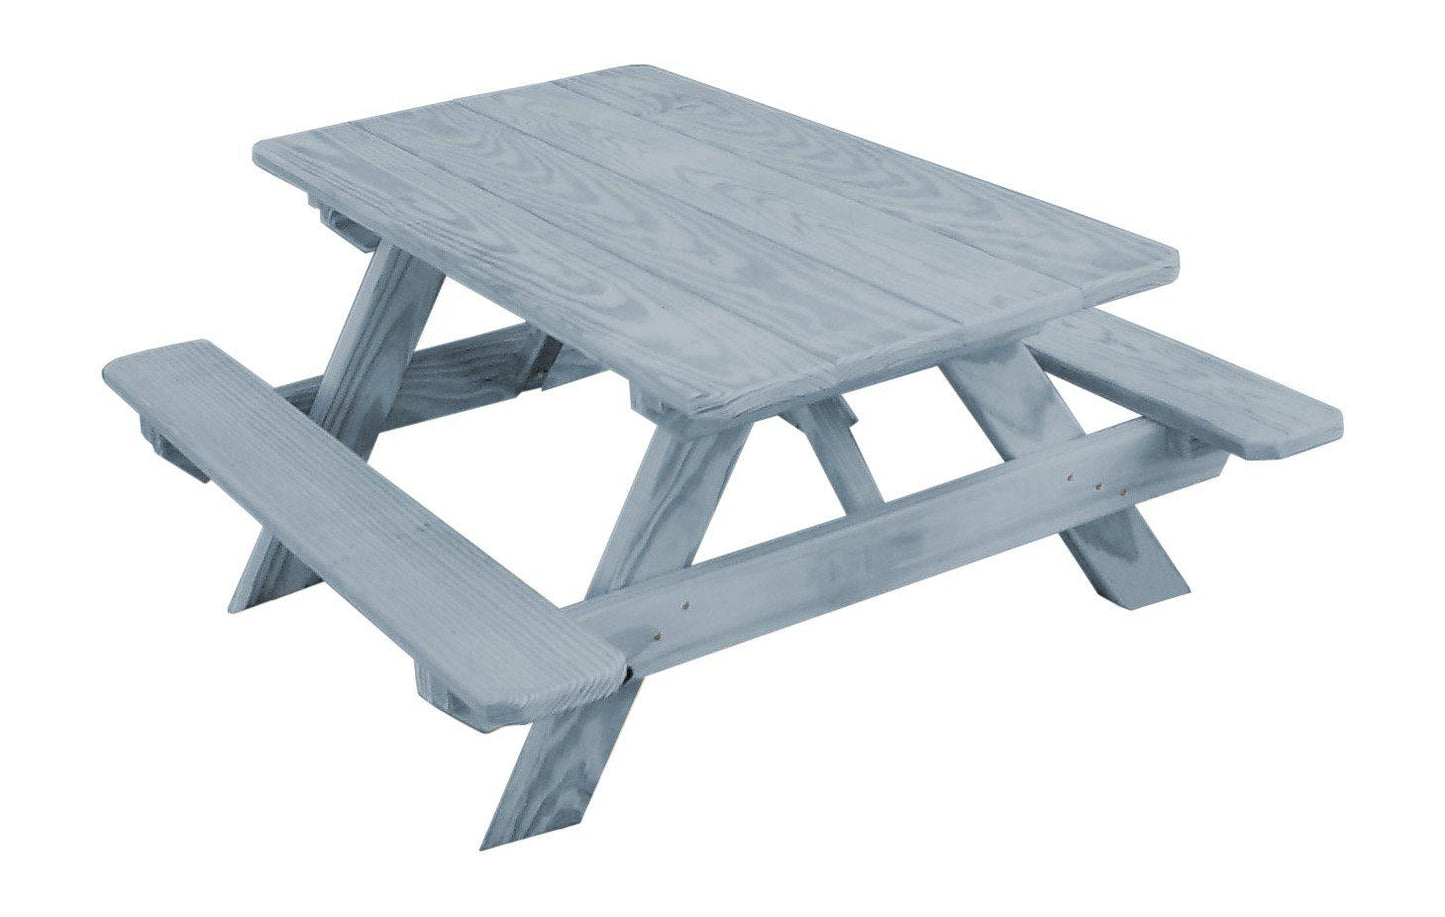 A&L Furniture Co. Yellow Pine Kid's Table (22" Wide) - Specify for FREE 2" Umbrella Hole - LEAD TIME TO SHIP 10 BUSINESS DAYS